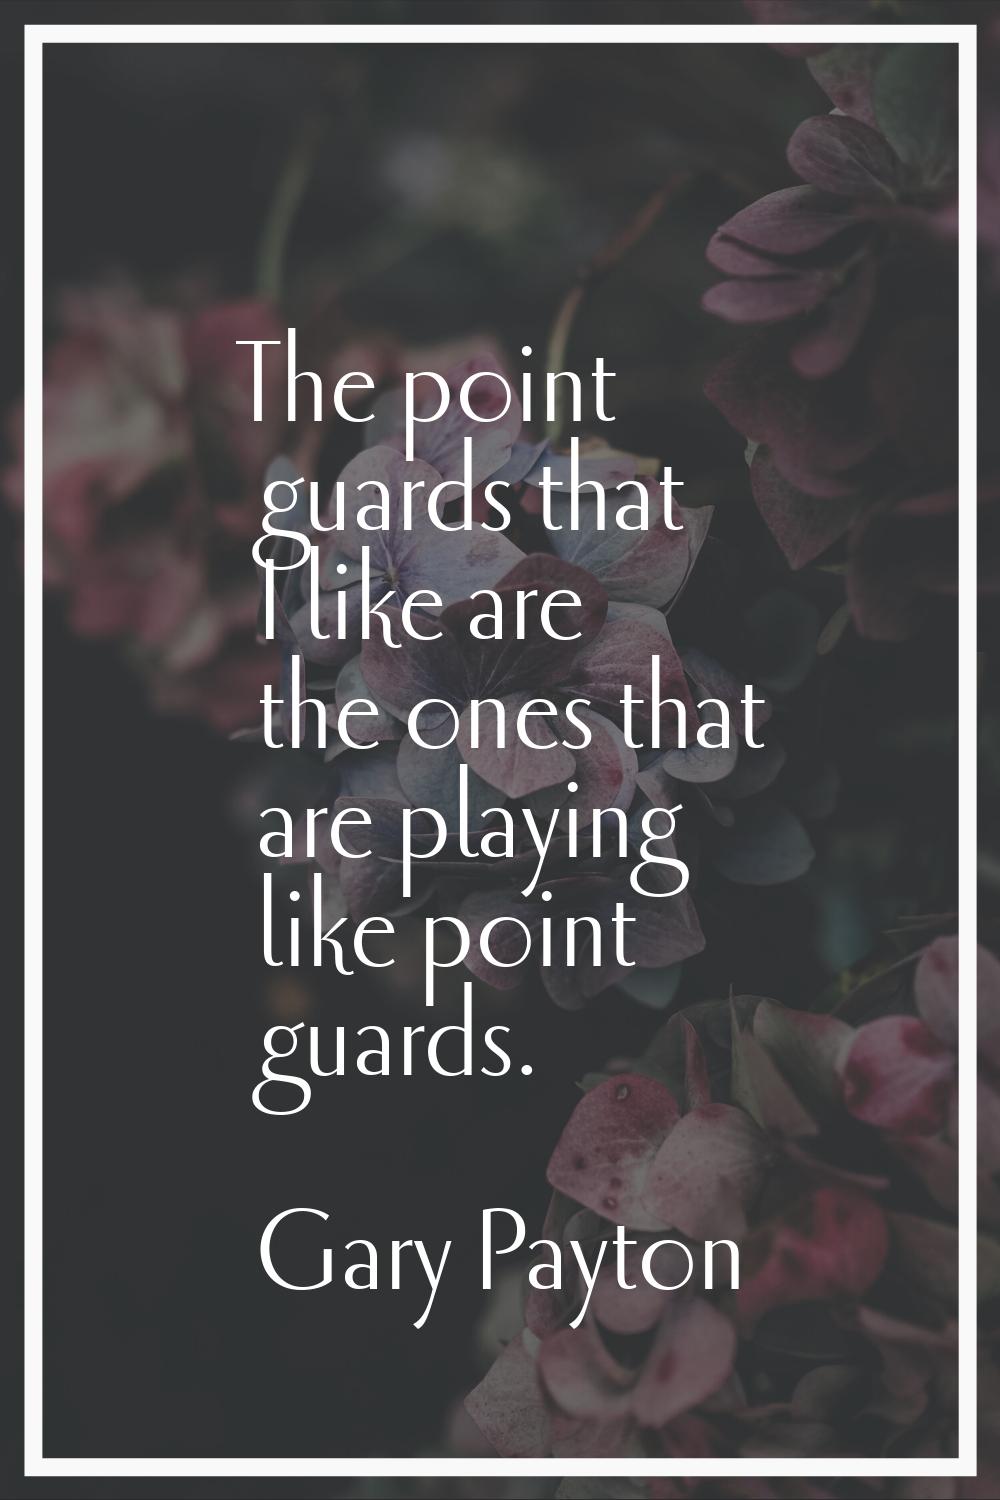 The point guards that I like are the ones that are playing like point guards.